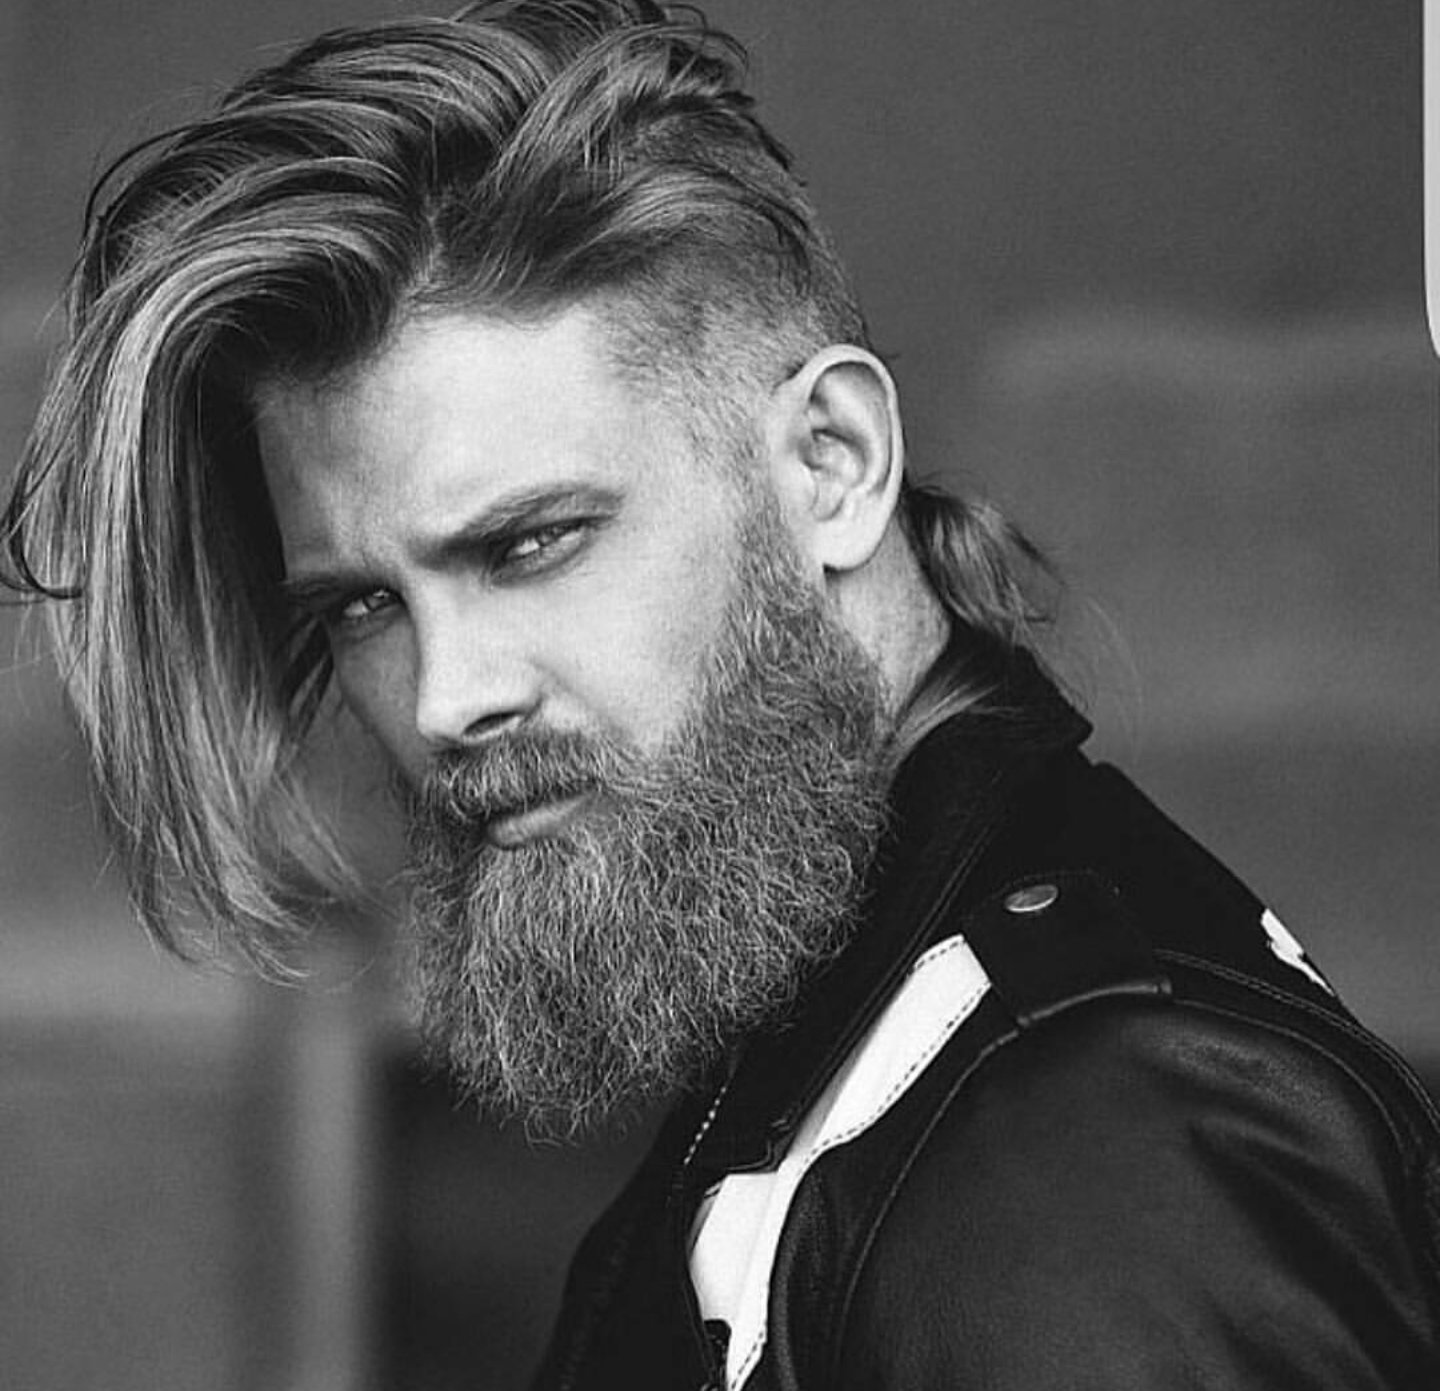 Low Fade with Beard - Men's Long Hair With Undercut Hairstyles | Men haircut  styles, Long hair styles men, Cool hairstyles for men